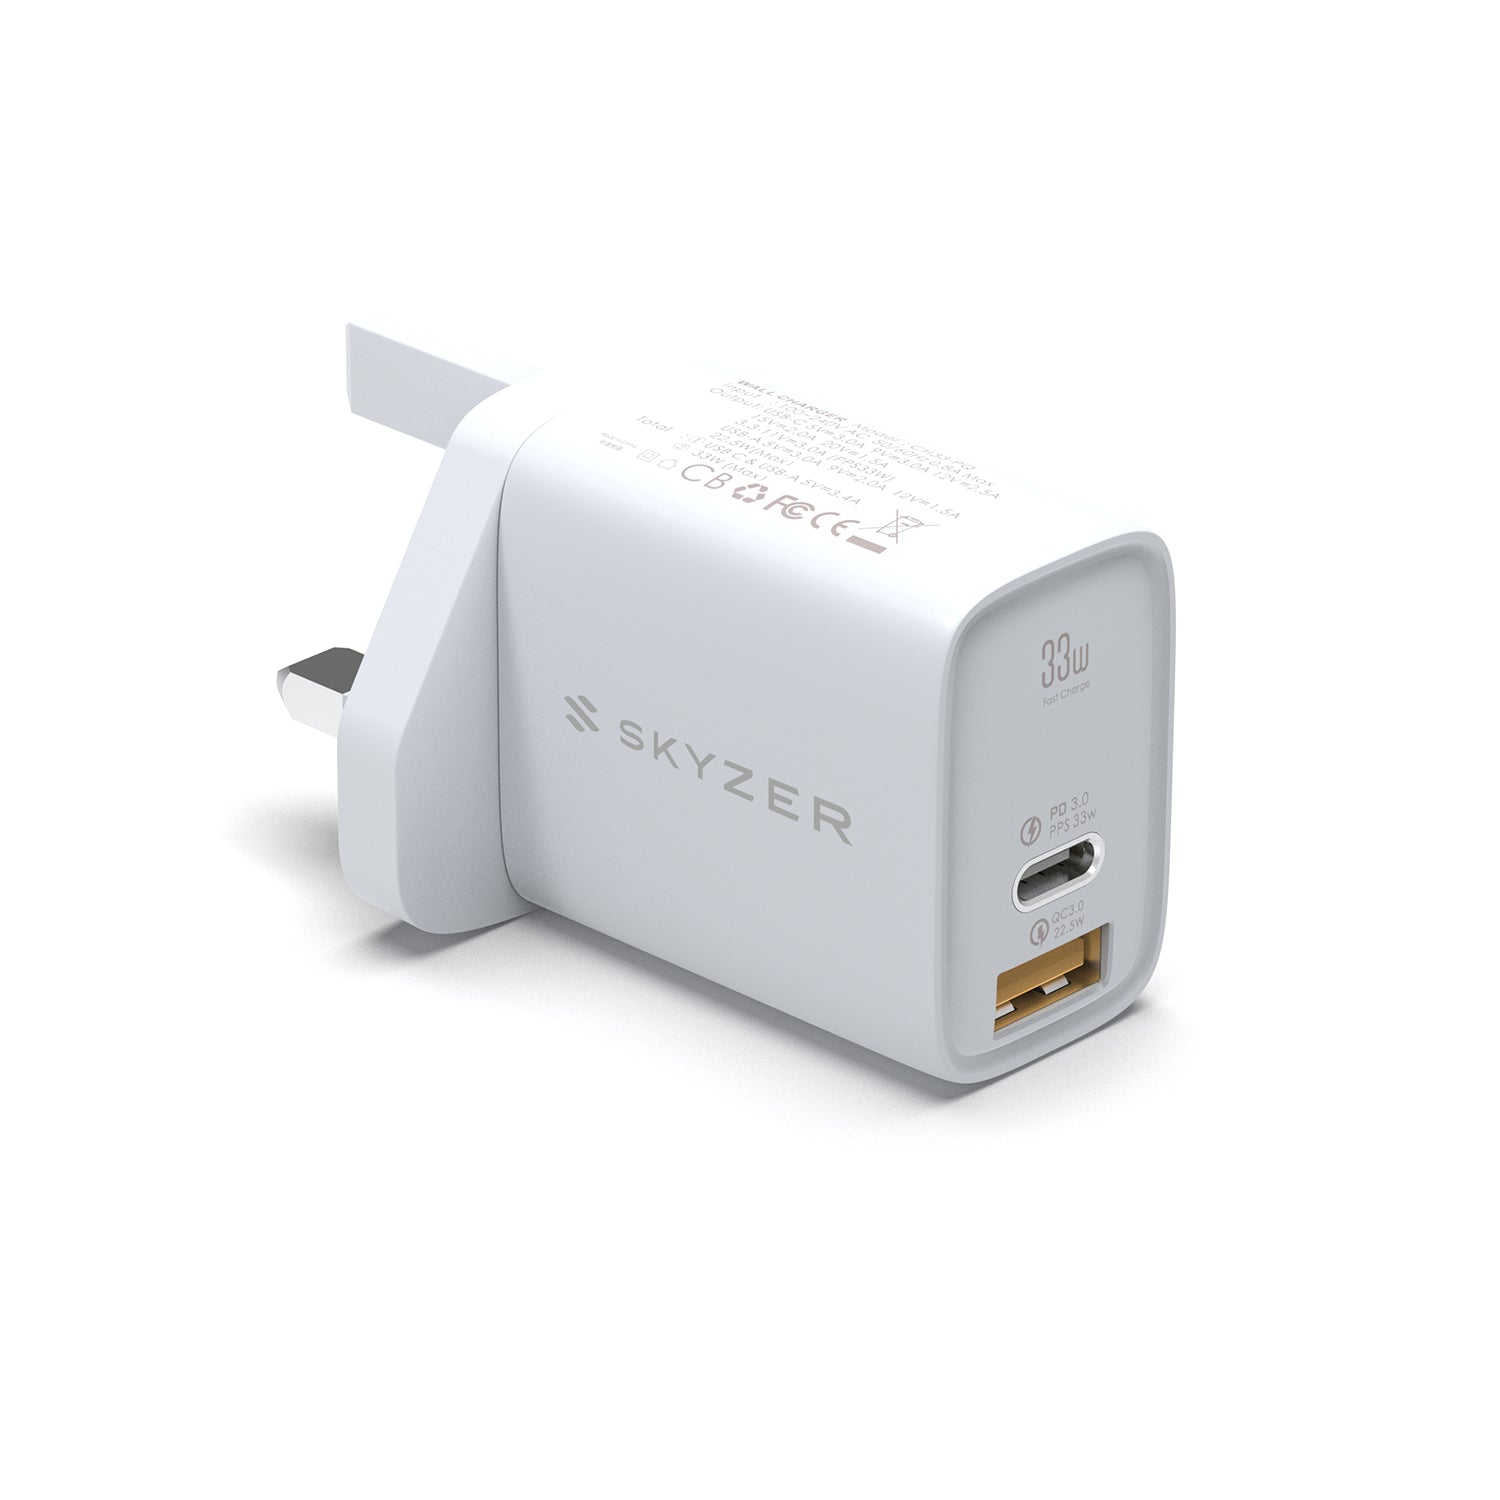 Skyzer PD157 Speed Pro PD/PPS 33W Max Fast Charging Wall Charger with 1 USB-C + 1 USB-A Port